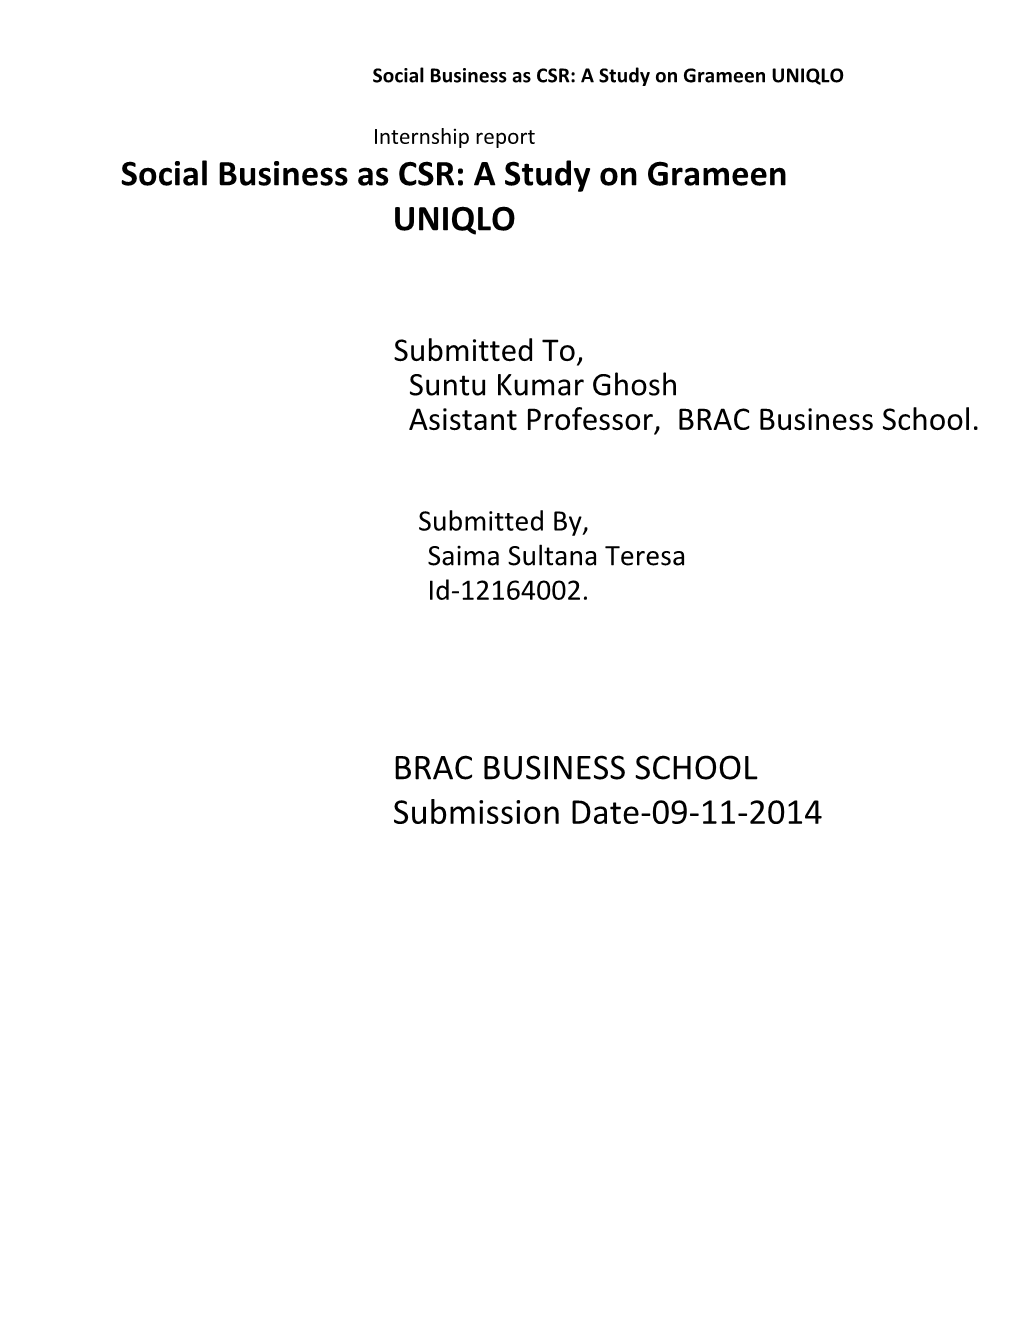 Social Business As CSR: a Study on Grameen UNIQLO